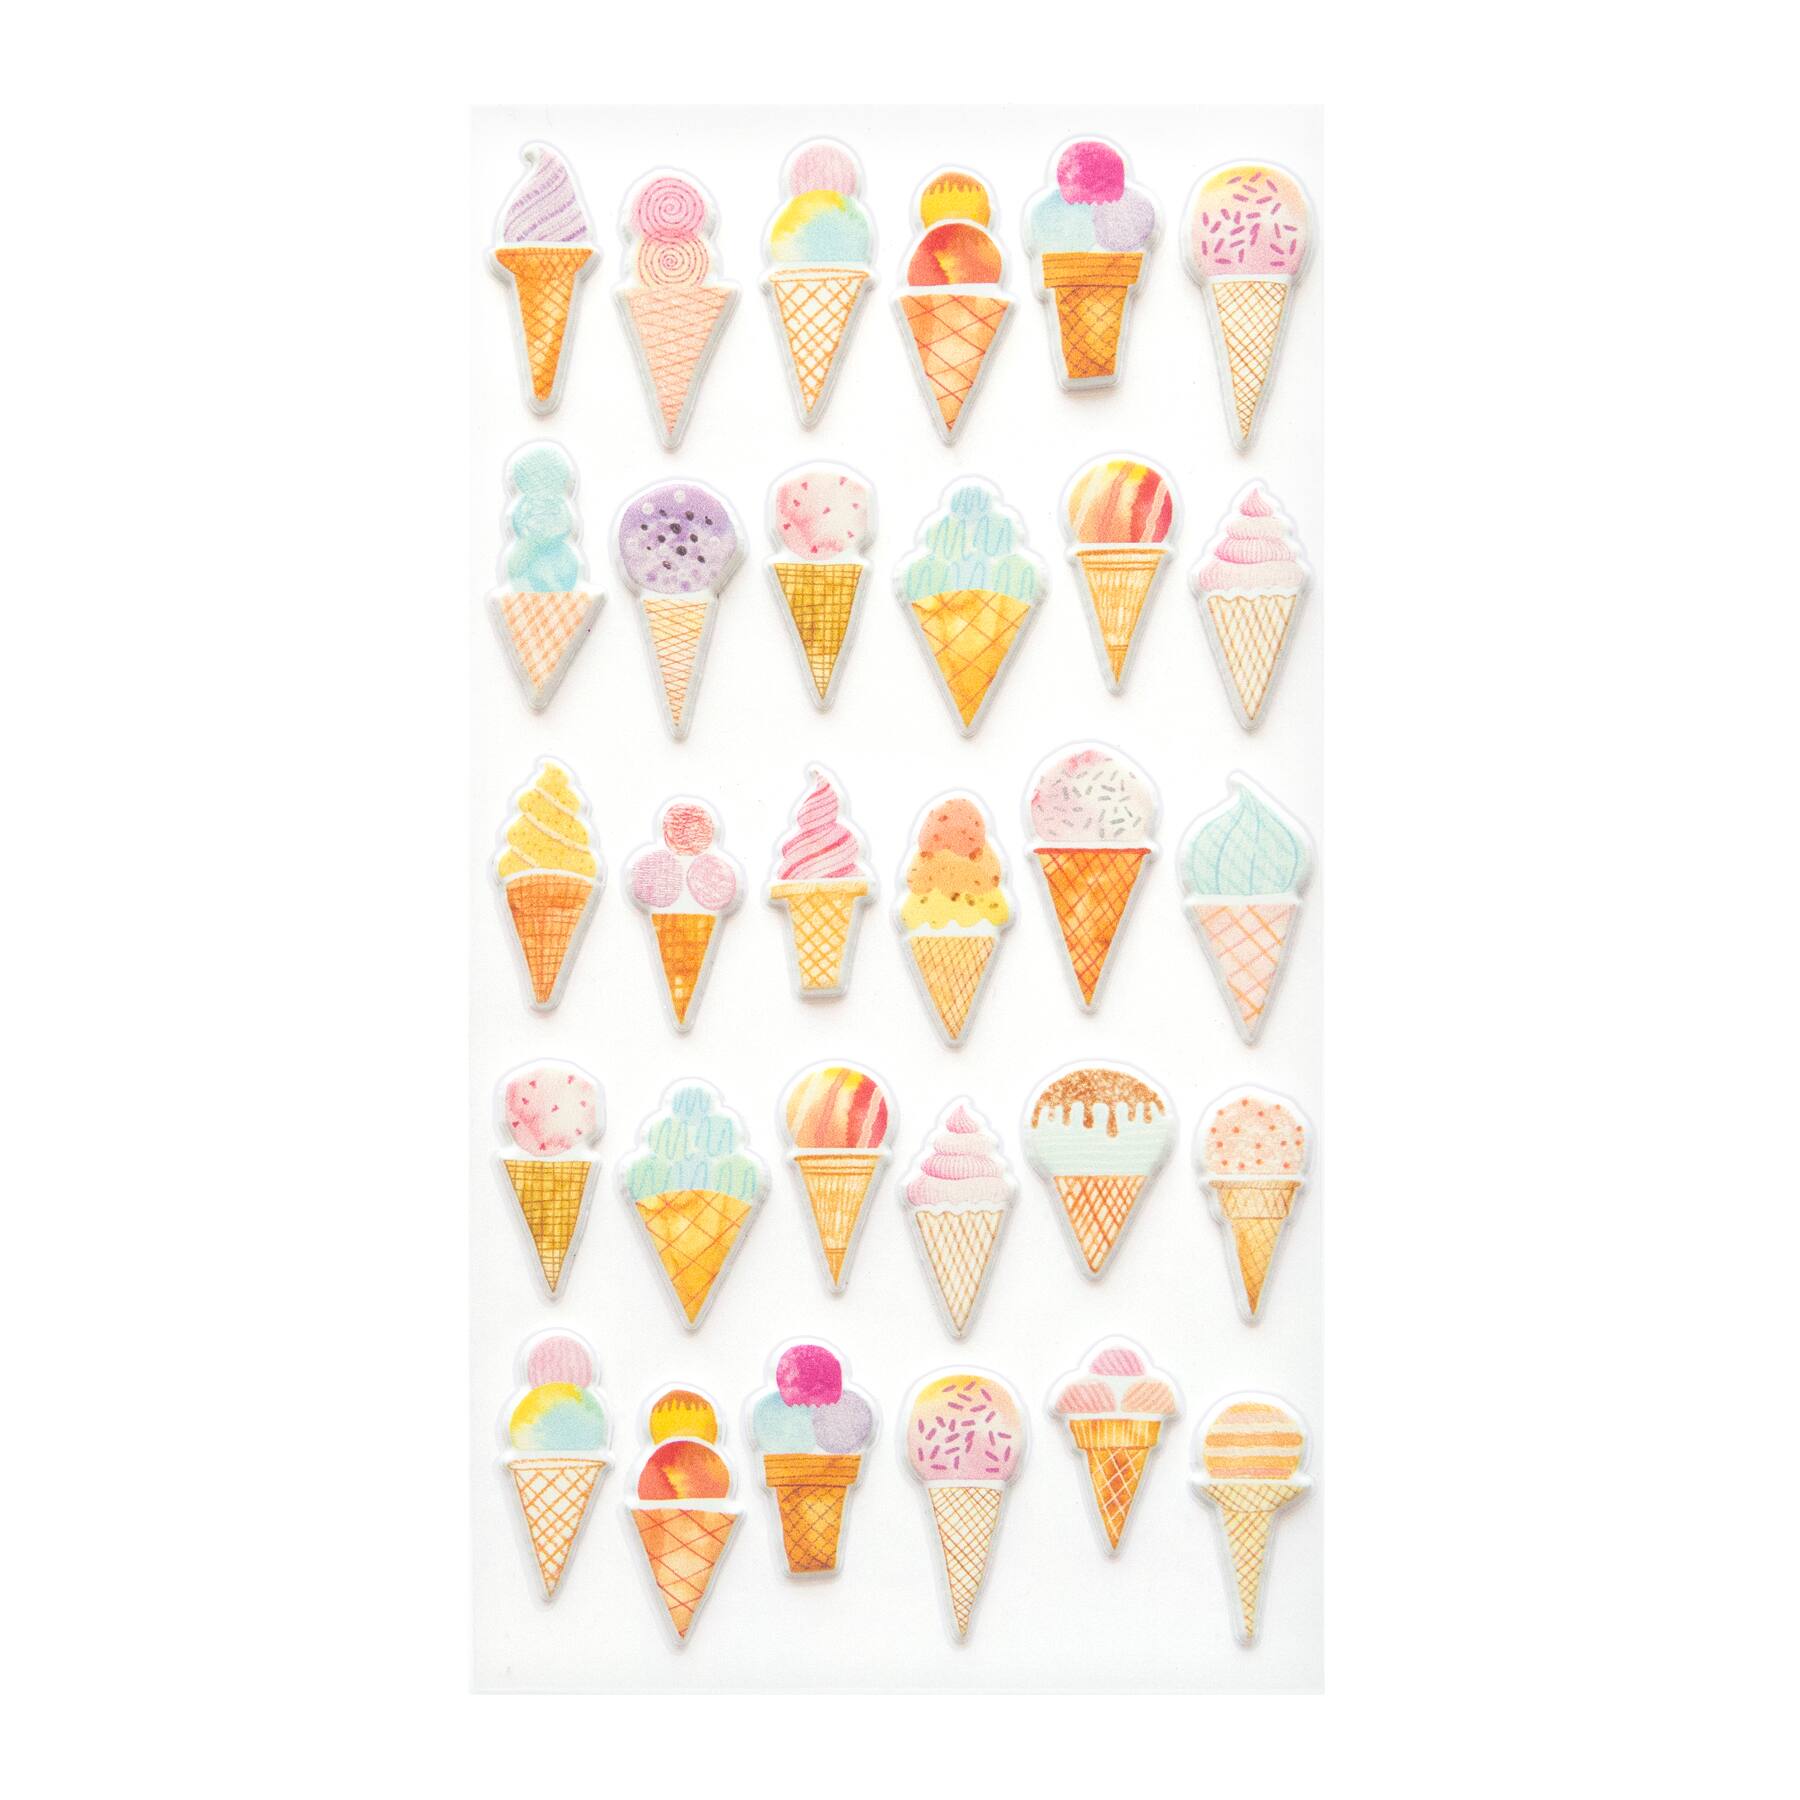 iscream Sugar-riffic Cookies Sheet of 4 Repositionable Vinyl Cling Decals